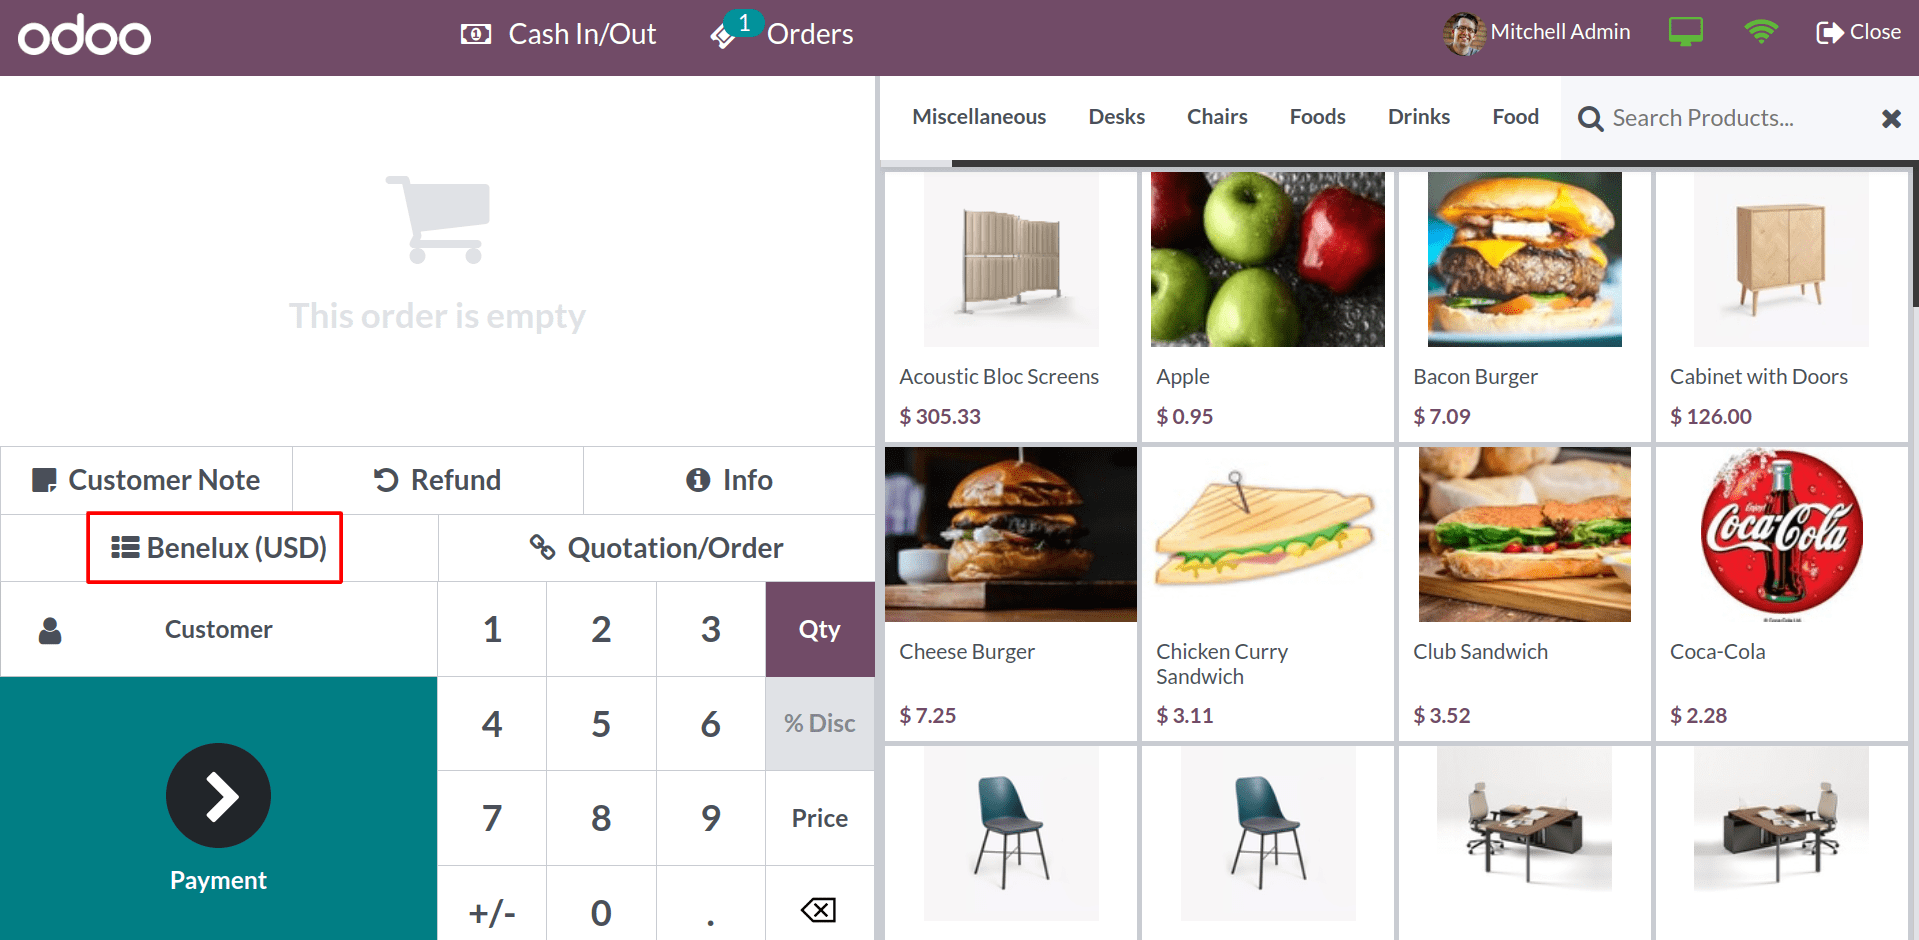 what-are-the-benefits-of-pricelist-in-restaurants-using-odoo-16-pos-4-cybrosys